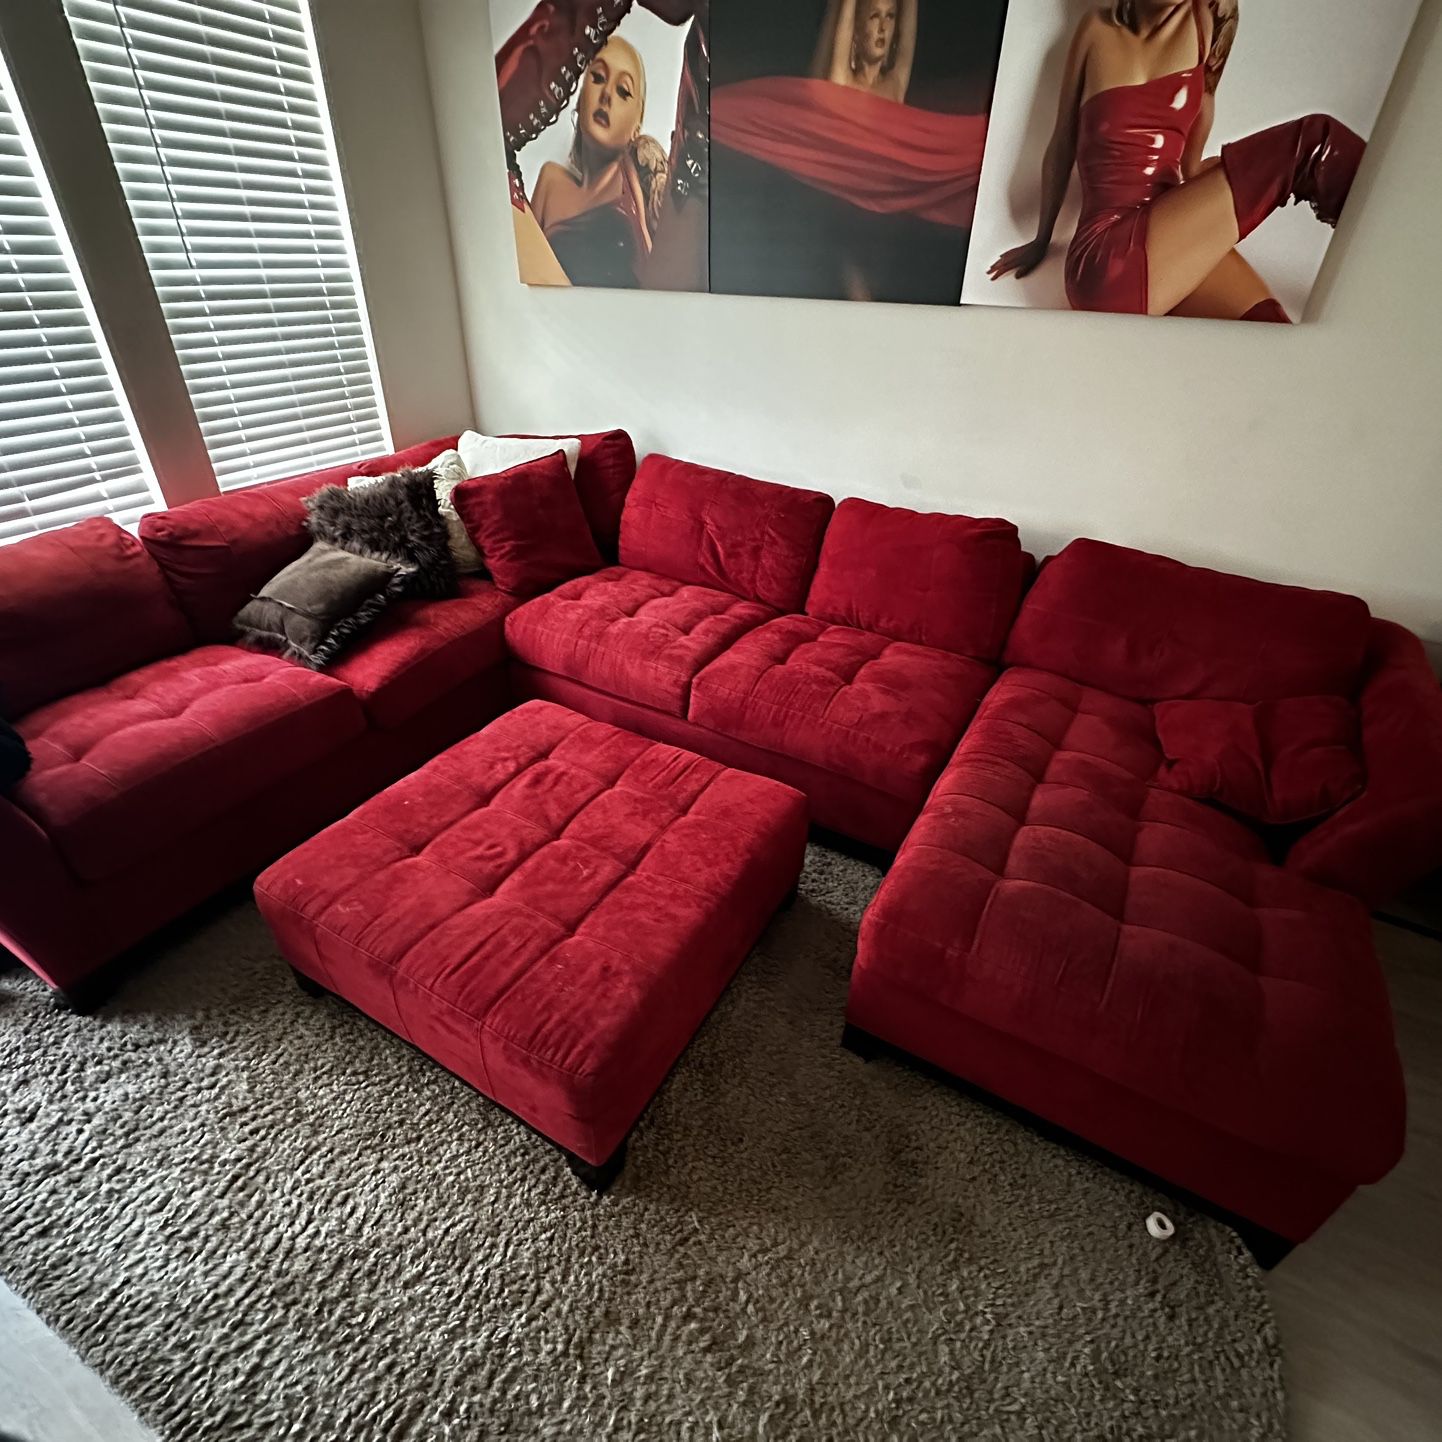 6 Seater Couch with Ottoman NEEDS TO GO